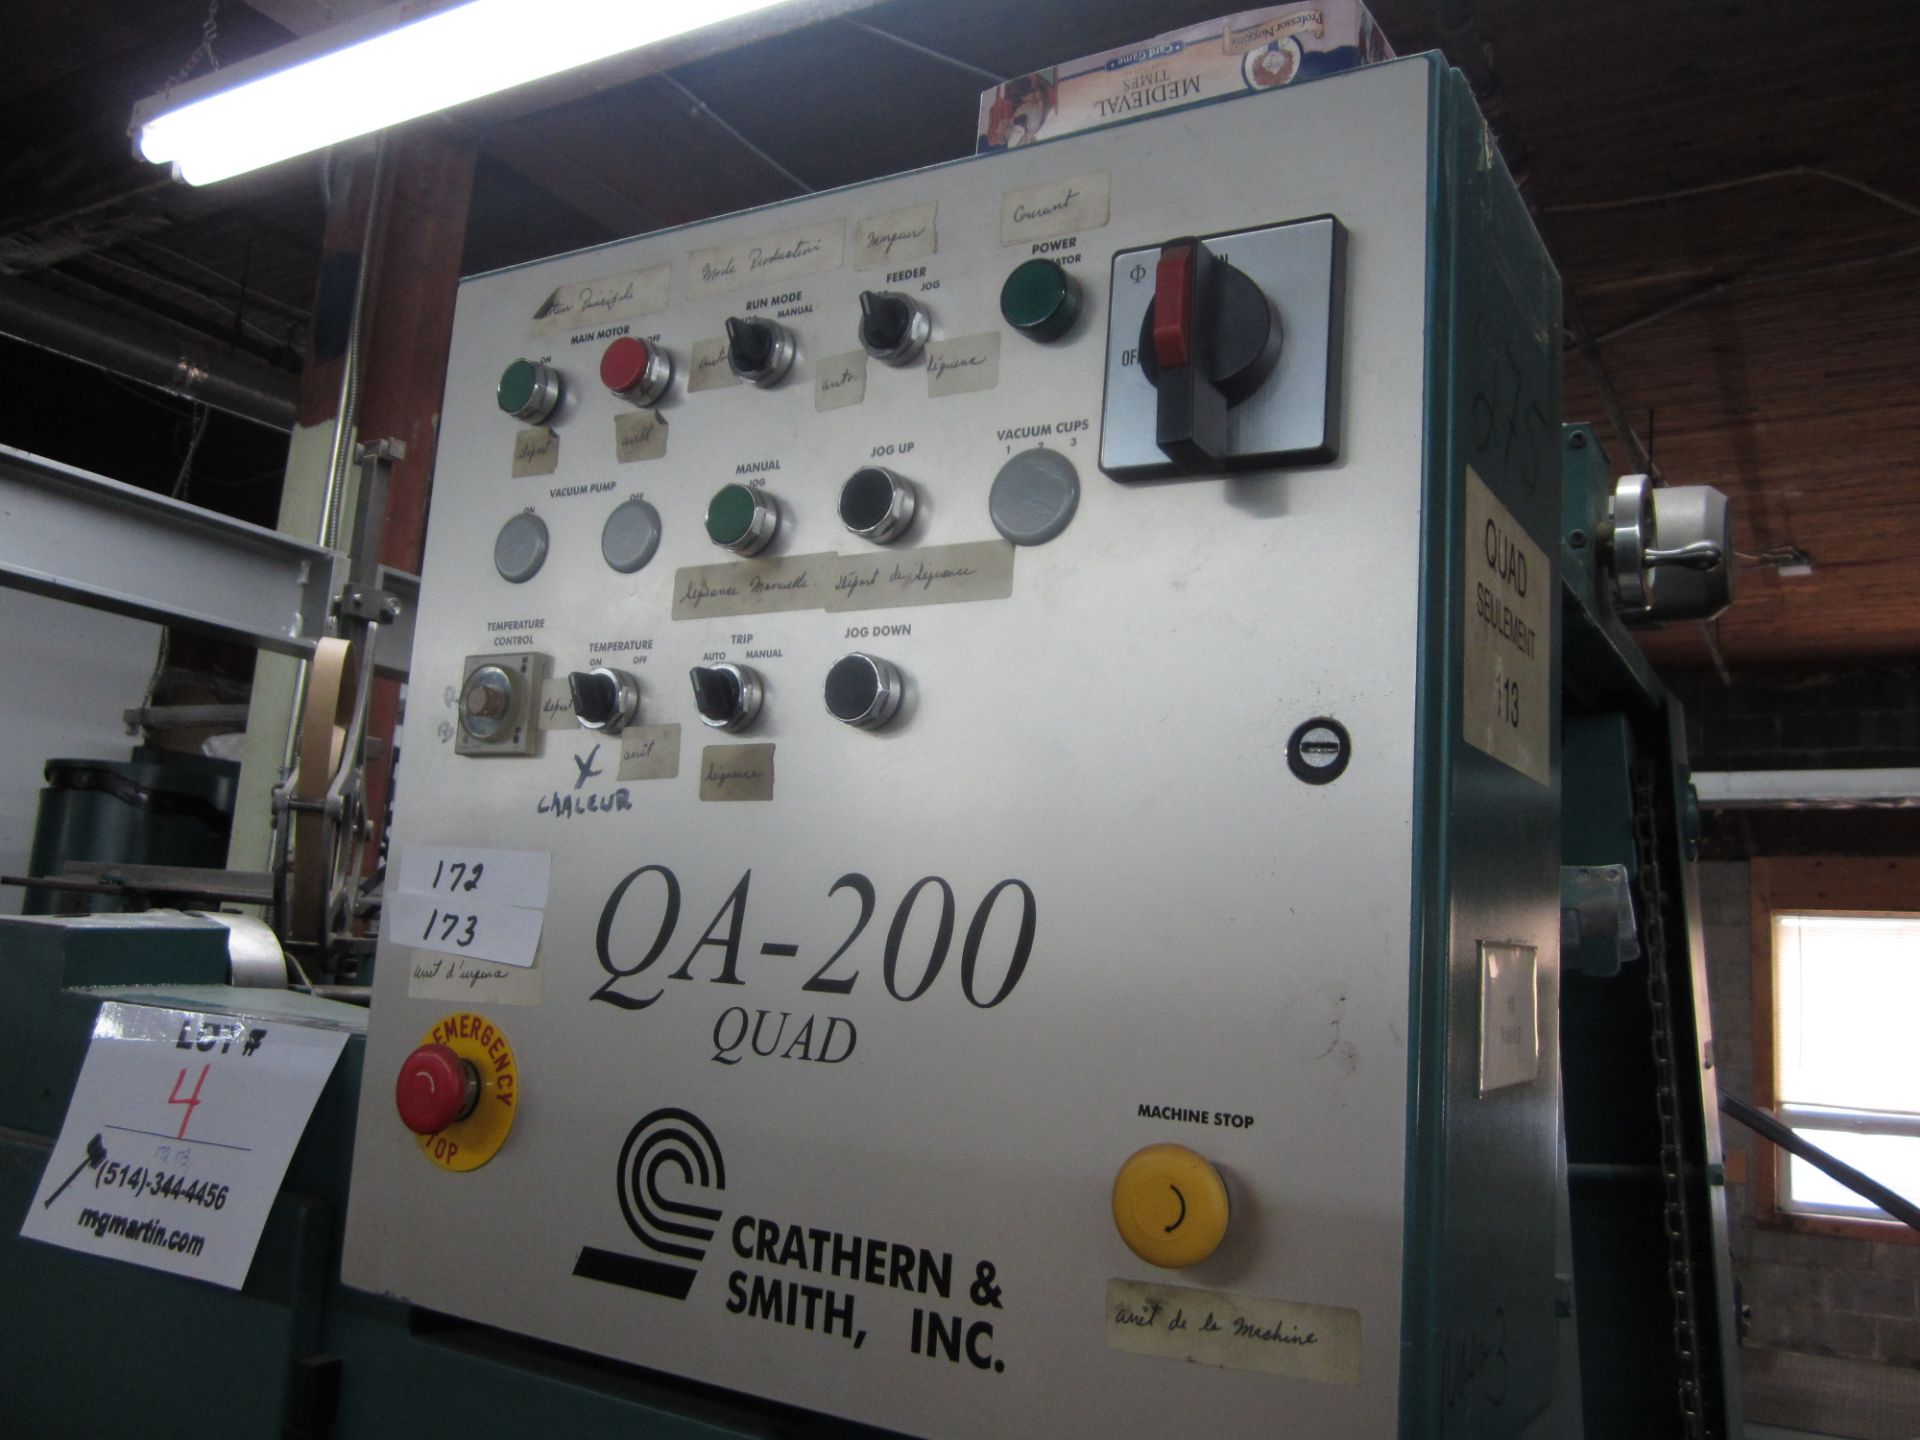 INCLUDING: CRATHERM & SMITH WRAPPER #1142 MODEL BNS SPOTTER 56 MODEL RBS S/N 56 AUTOMATIC GLUER ,ETC - Image 20 of 26